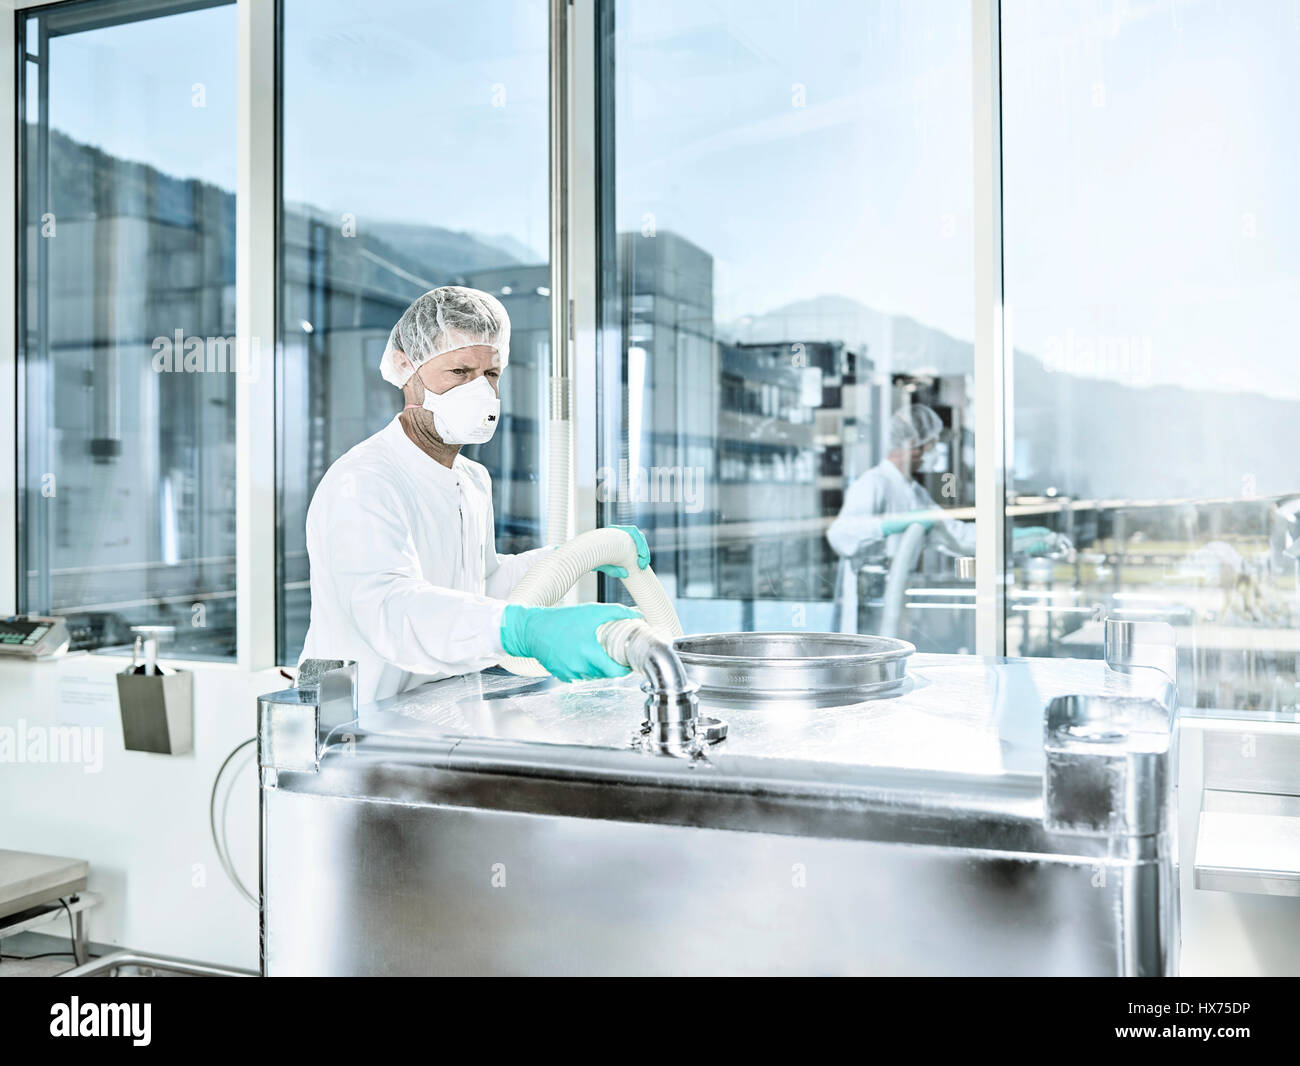 Chemical Laboratory, Chemist with hairnet and face mask in a pharmaceutical production, Austria Stock Photo